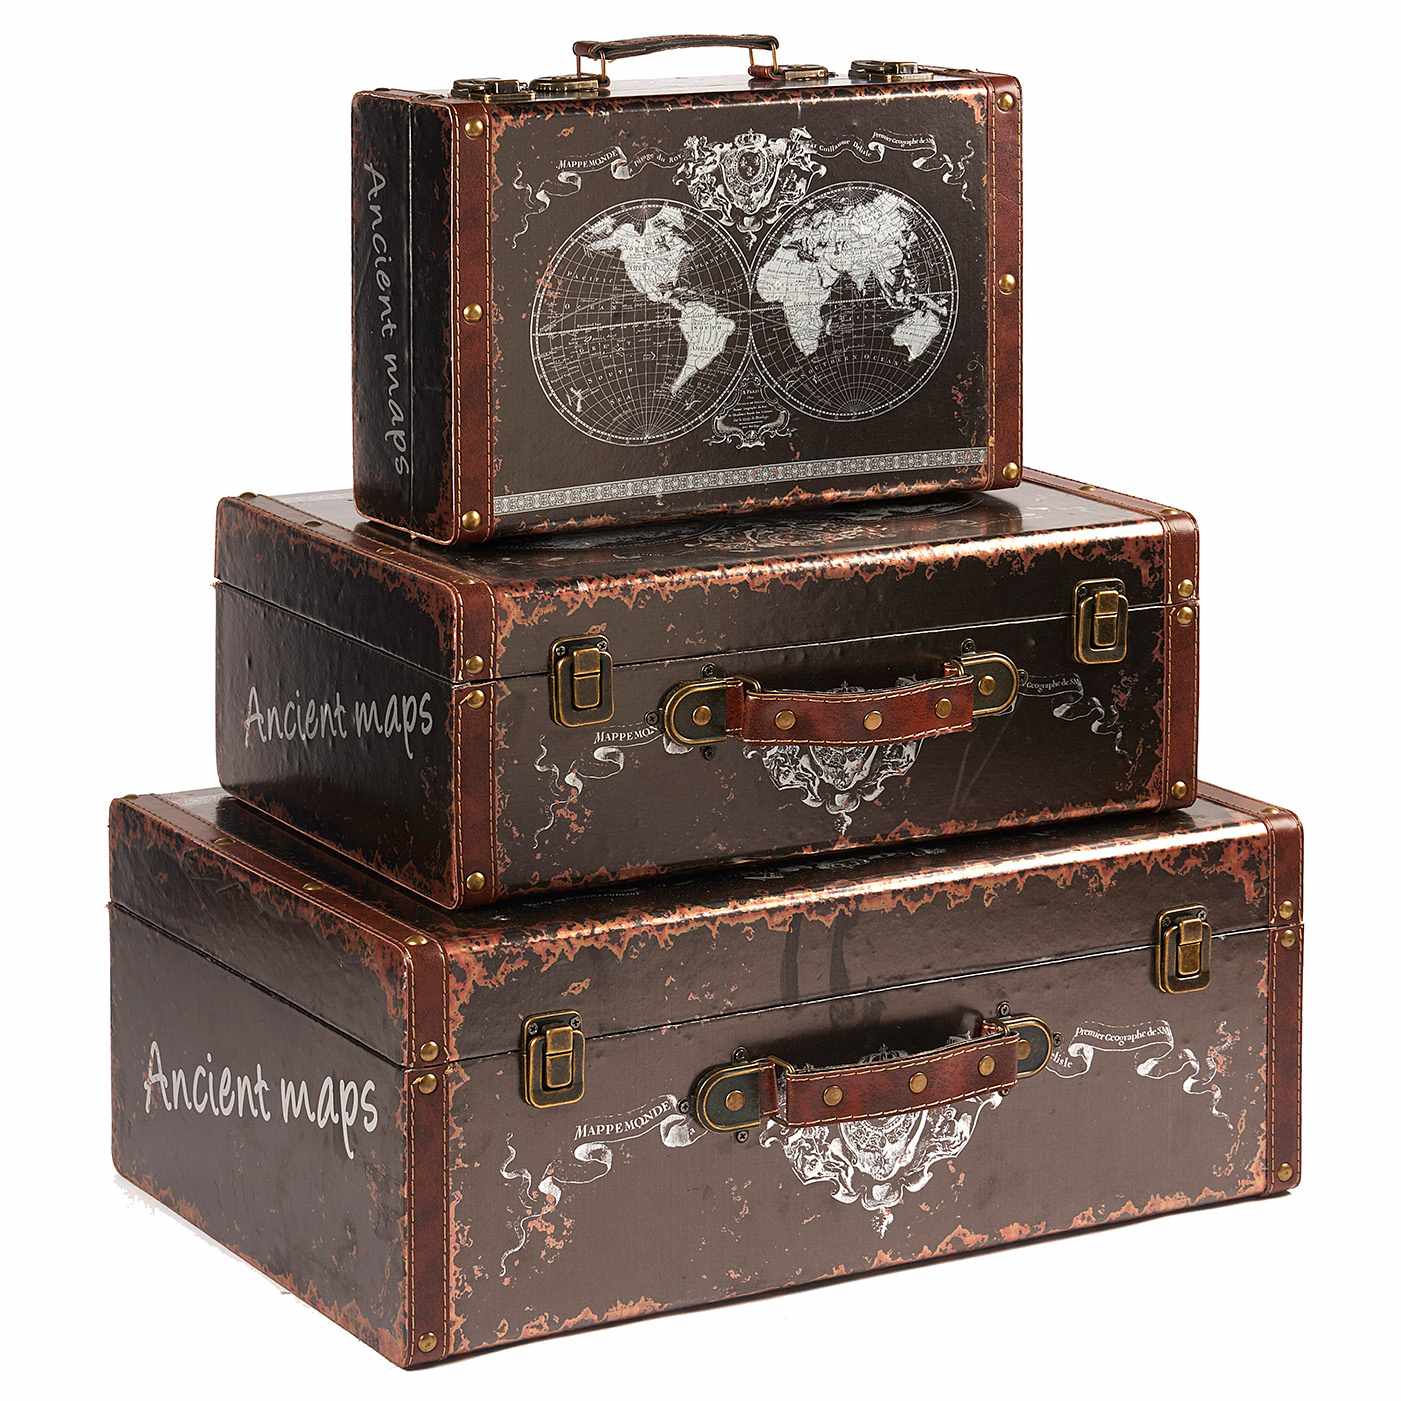 Vintage Wooden Suitcases Wholesale With Fashionable Design